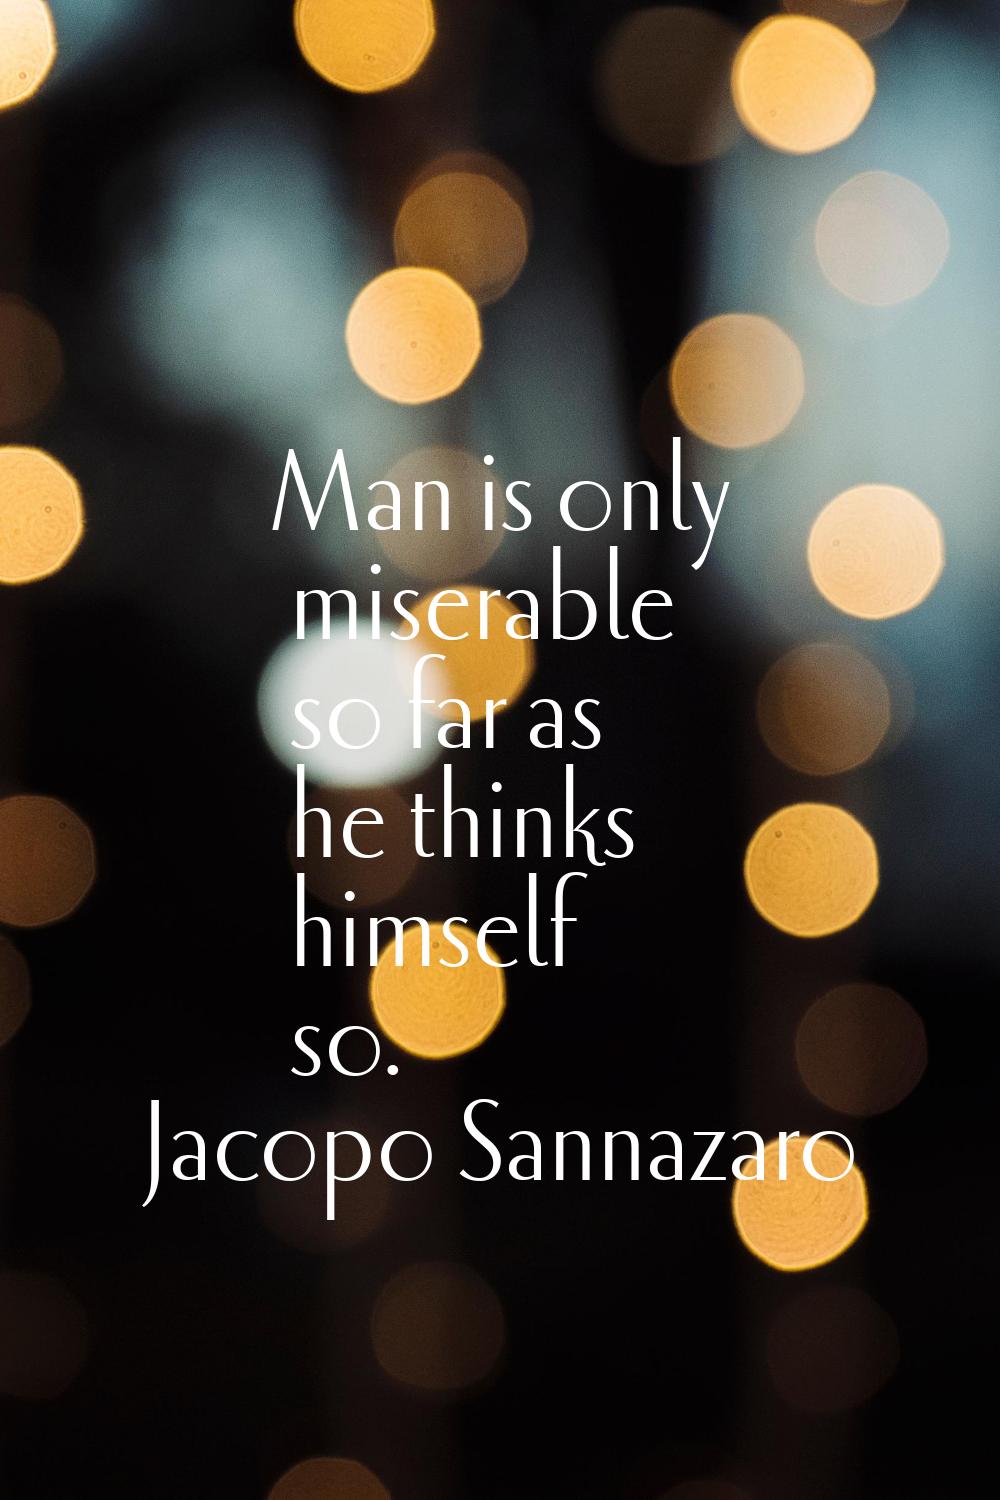 Man is only miserable so far as he thinks himself so.